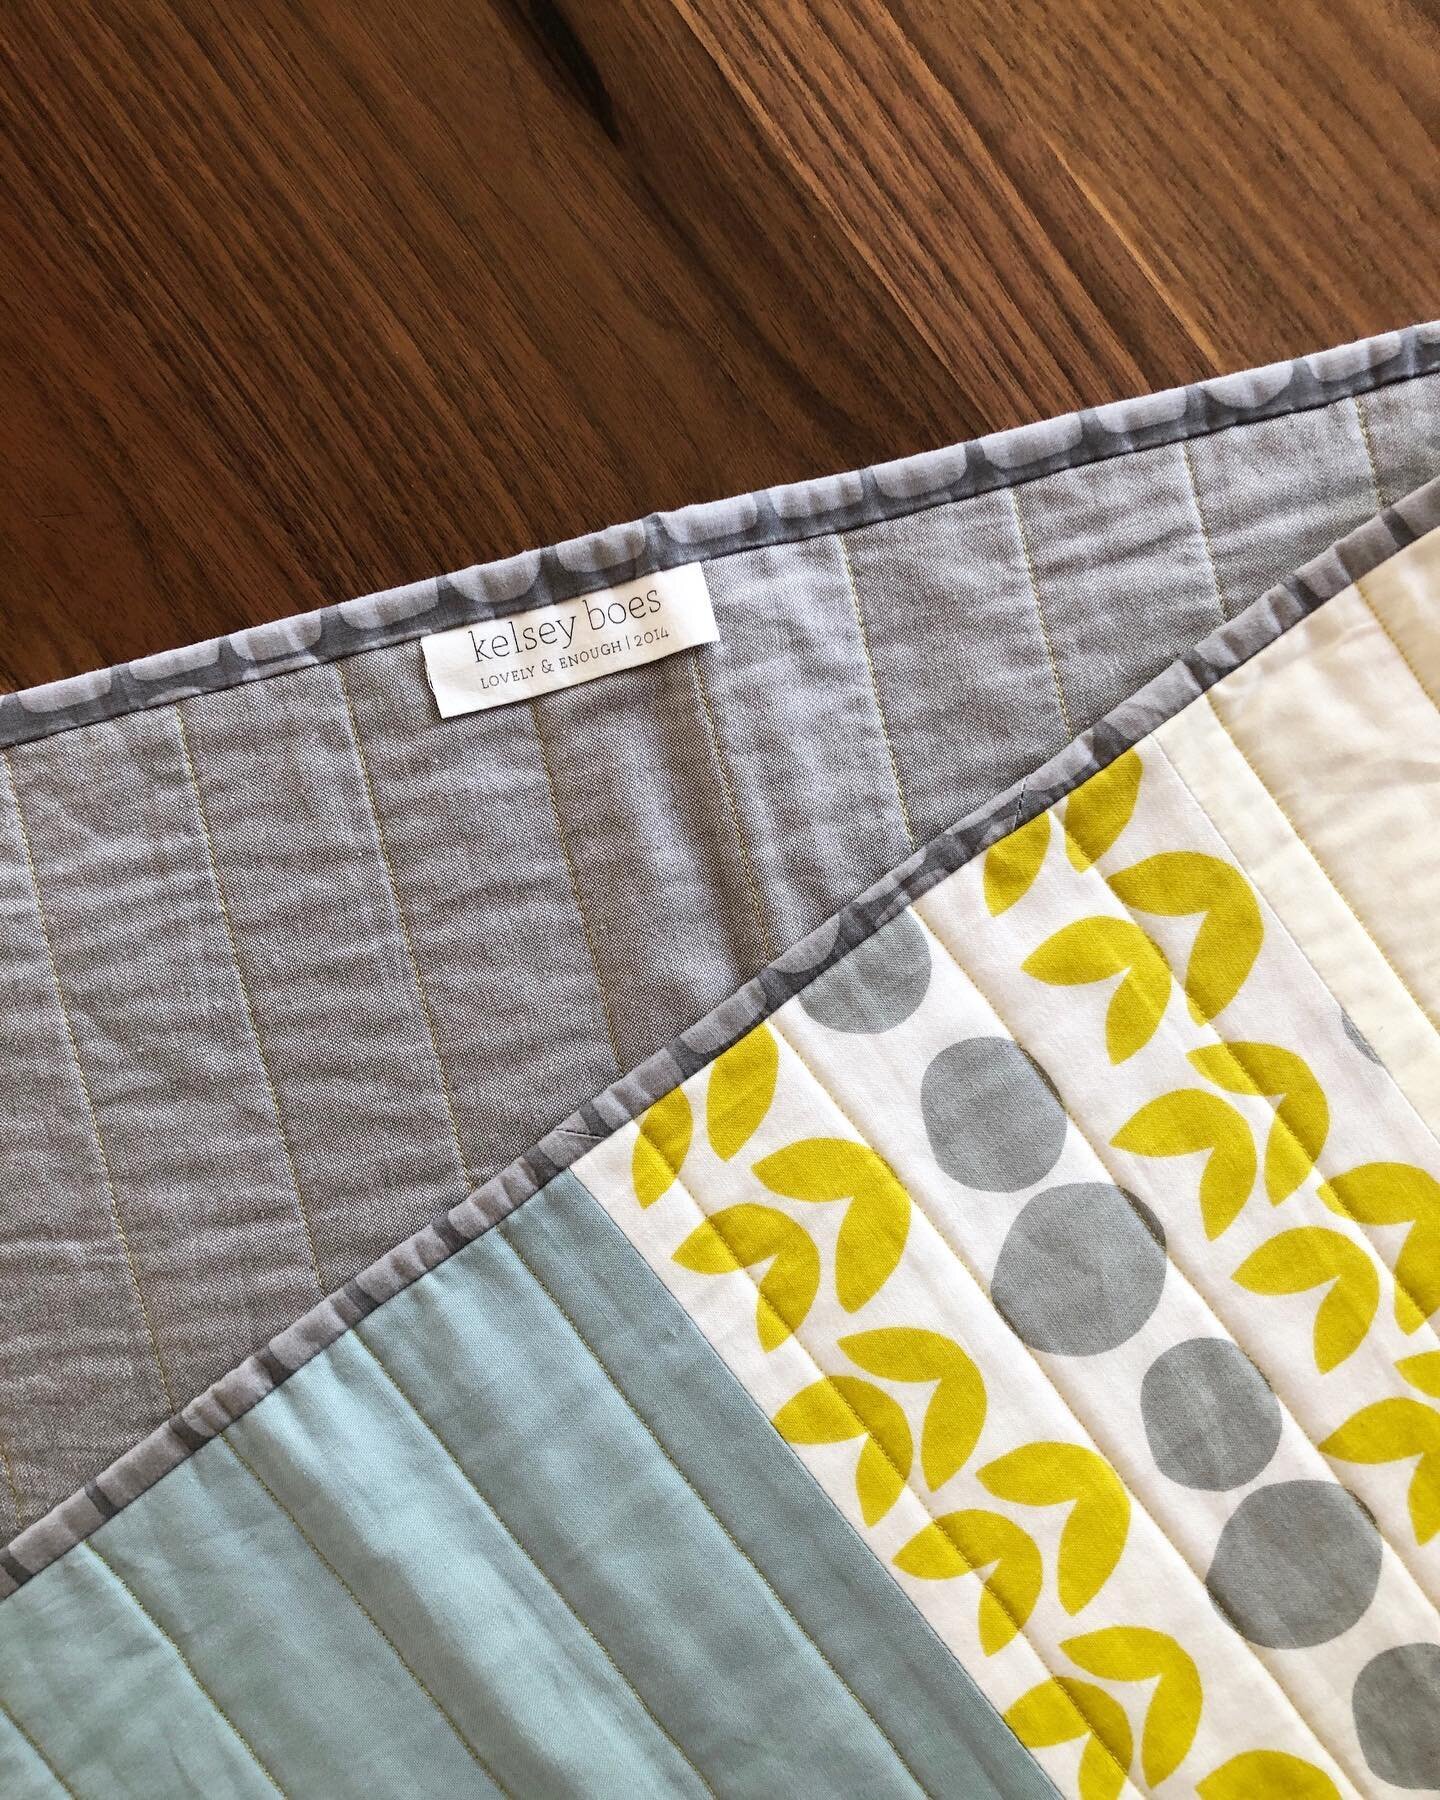 Most visited page: DIY Professional Quilt Labels. This tutorial on my website is hands-down the most visited page on my site, and I understand why. Making your own professional looking quilt labels adds the perfect finishing touch to a project.

I&rs